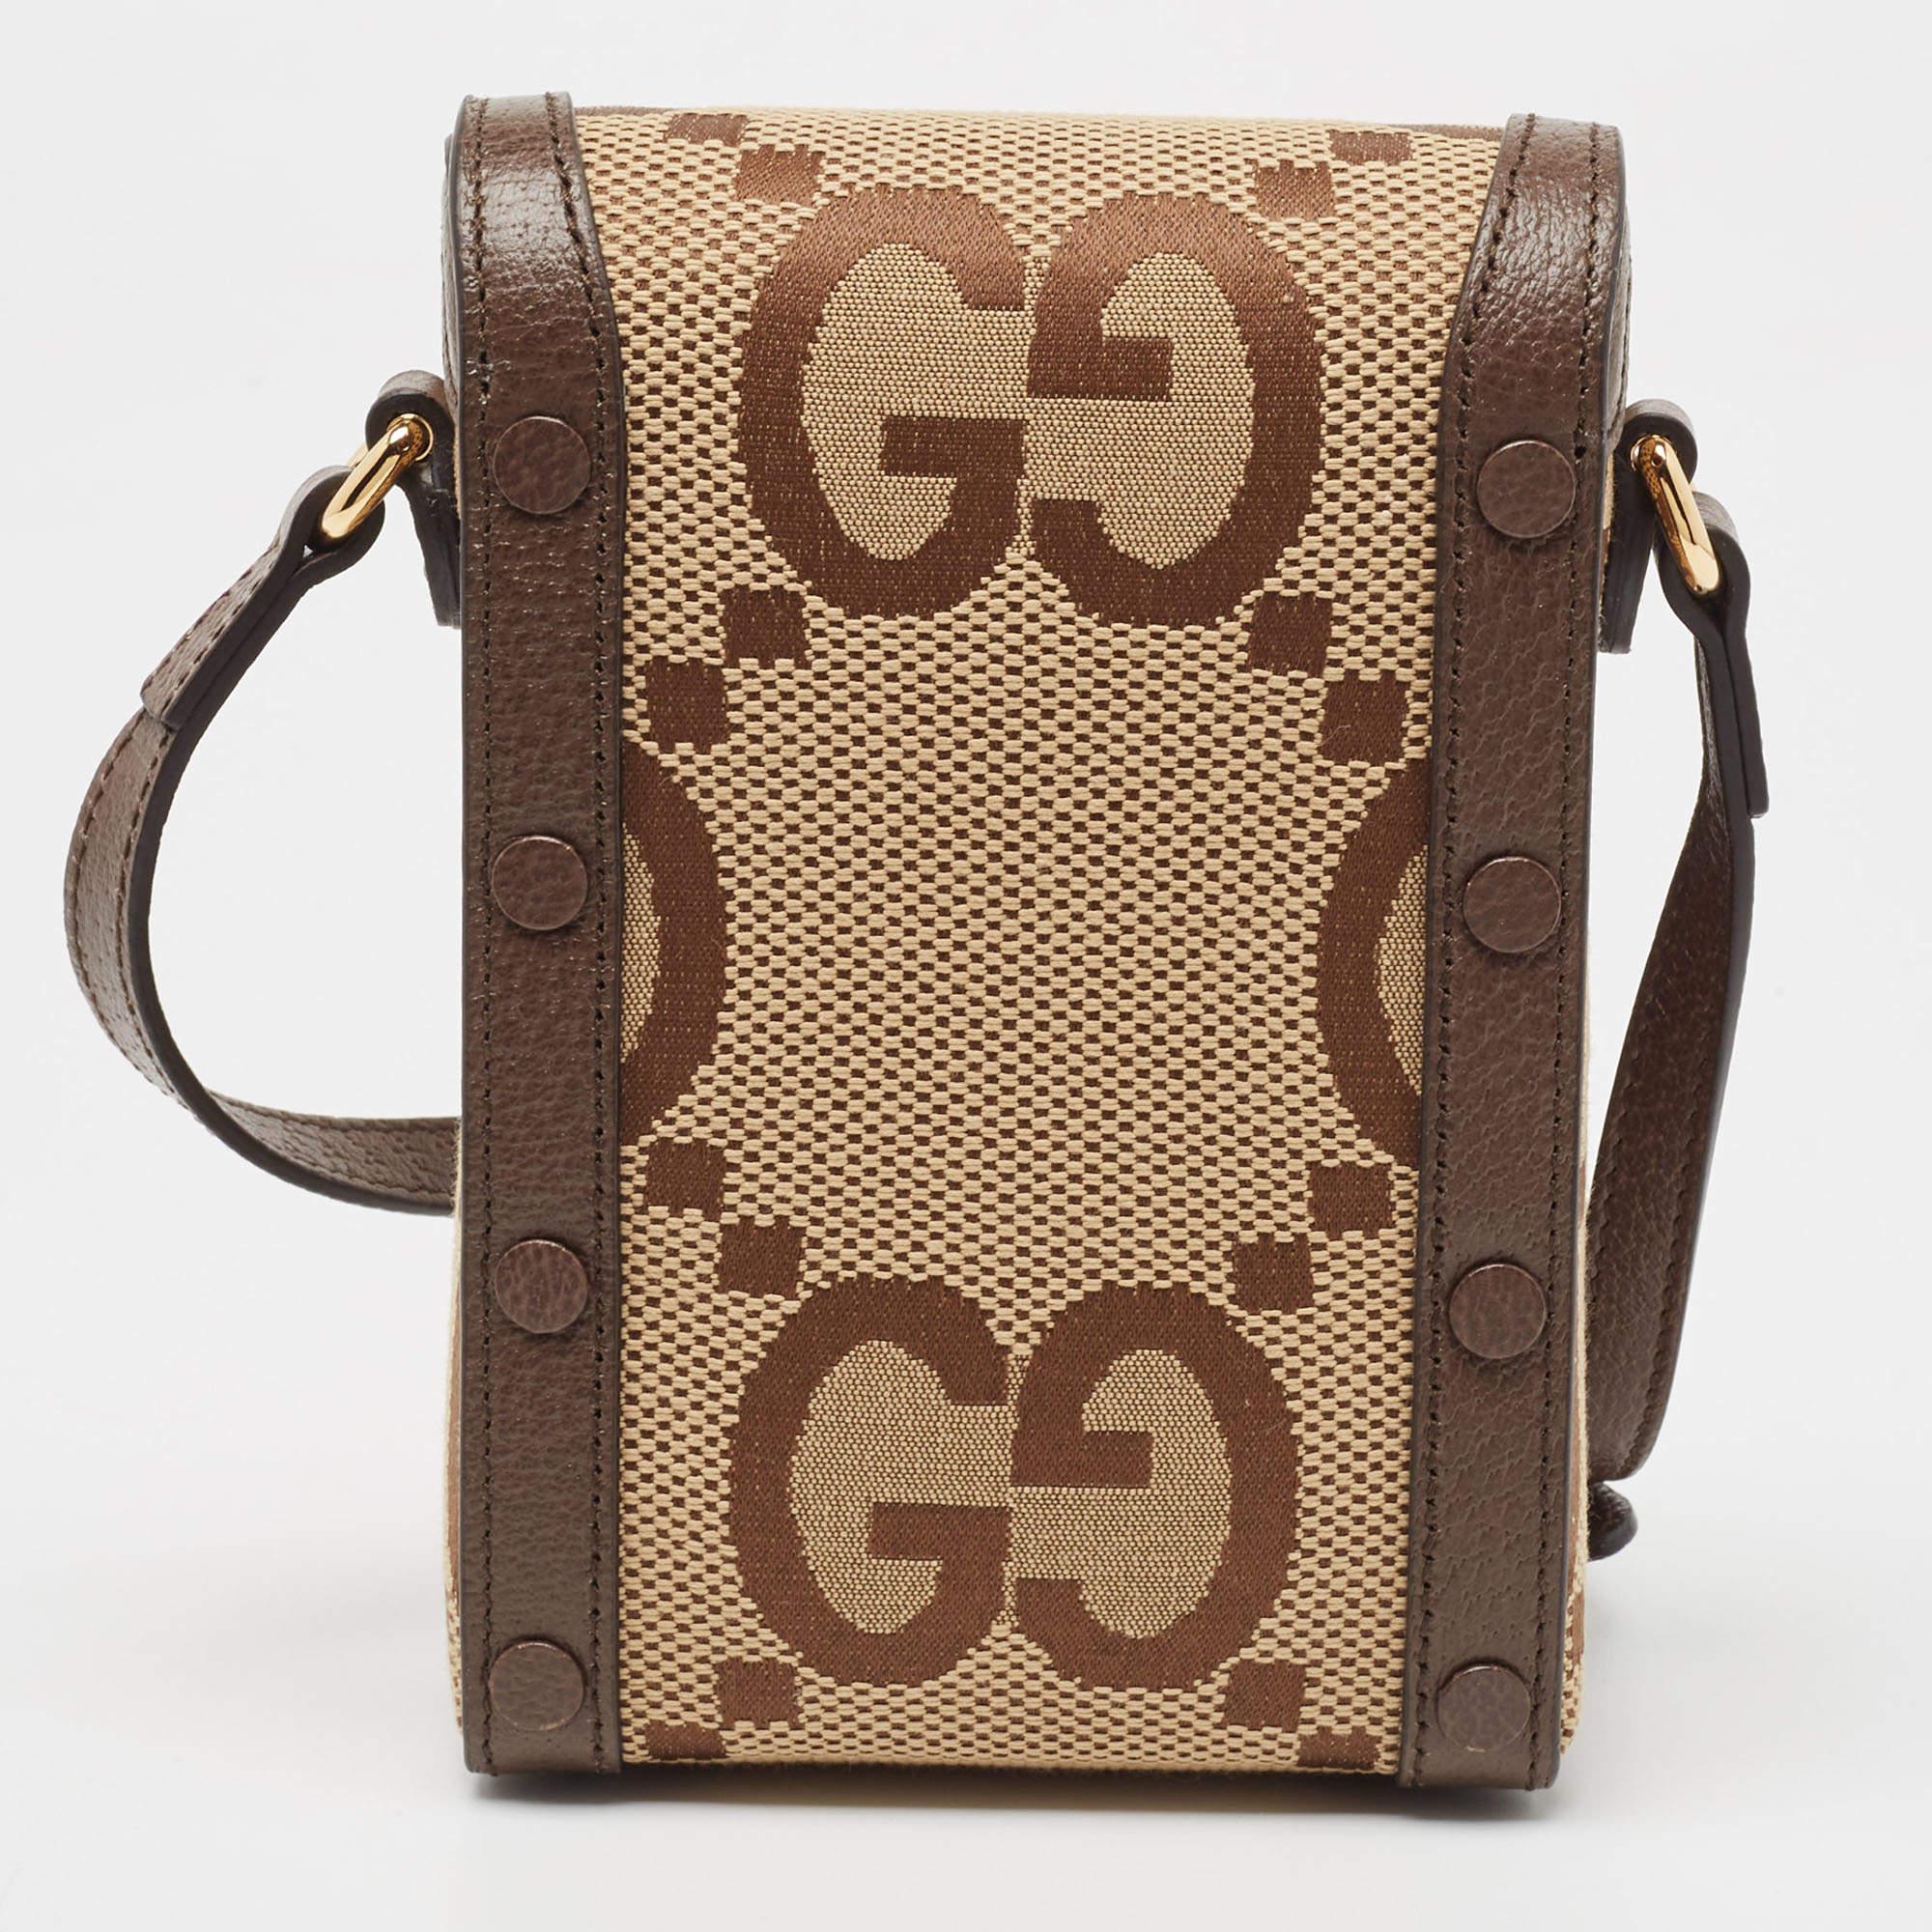 The Gucci Horsebit 1955 Crossbody Bag is an exquisite blend of luxury and sophistication. Crafted with the iconic GG canvas and supple leather, it features the signature horsebit detail, epitomizing timeless elegance. Its versatile crossbody design